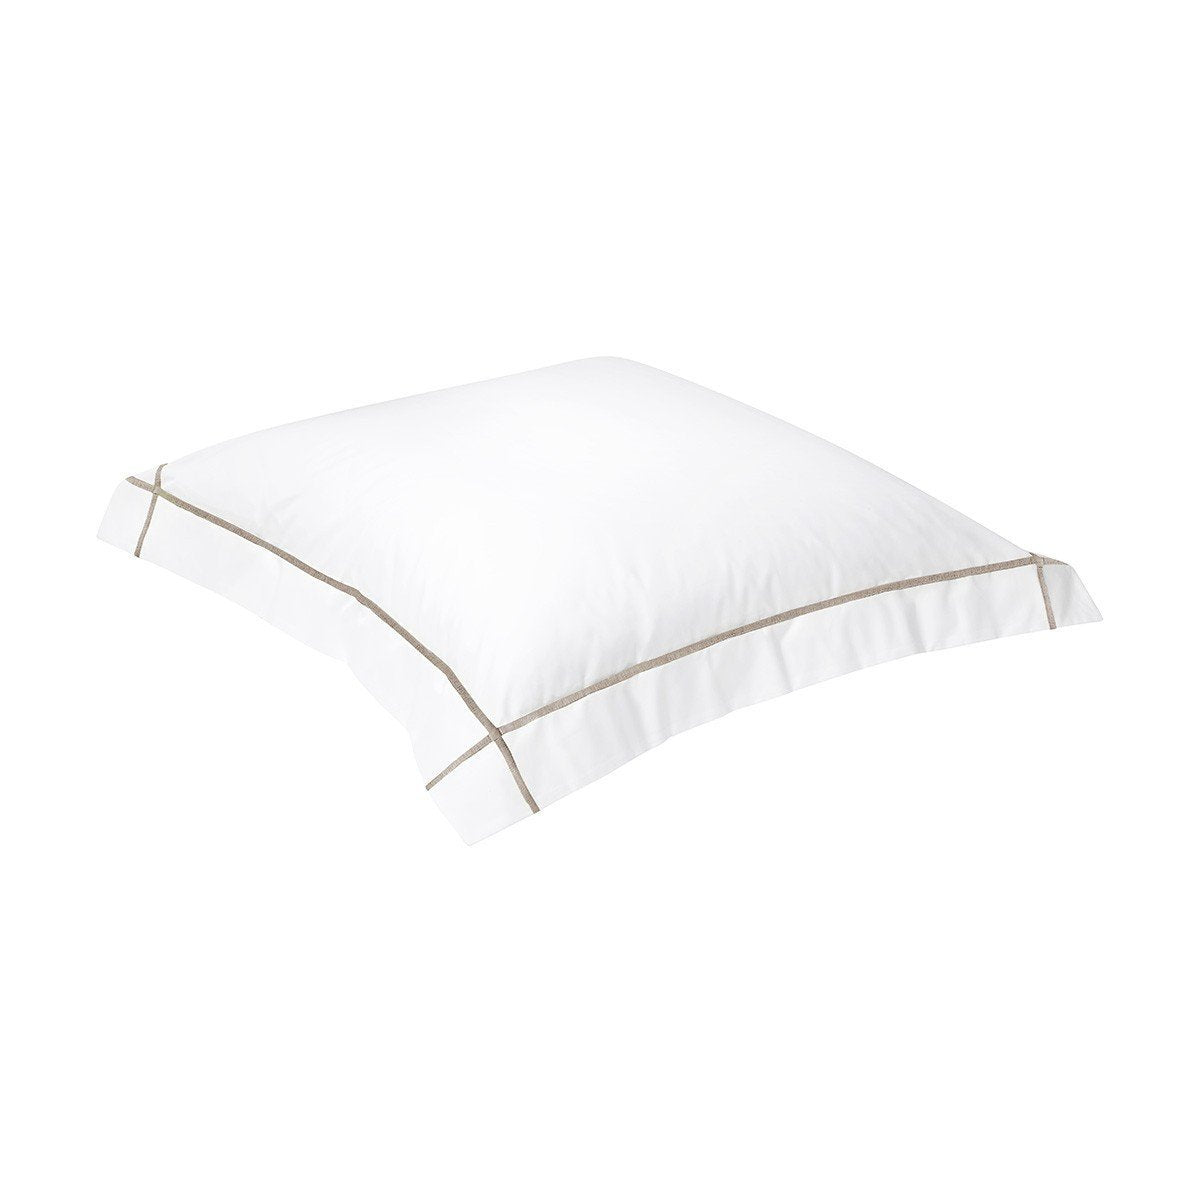 Athena Pierre Bedding Collection by Yves Delorme | Fig Linens - white bed linens, euro sham